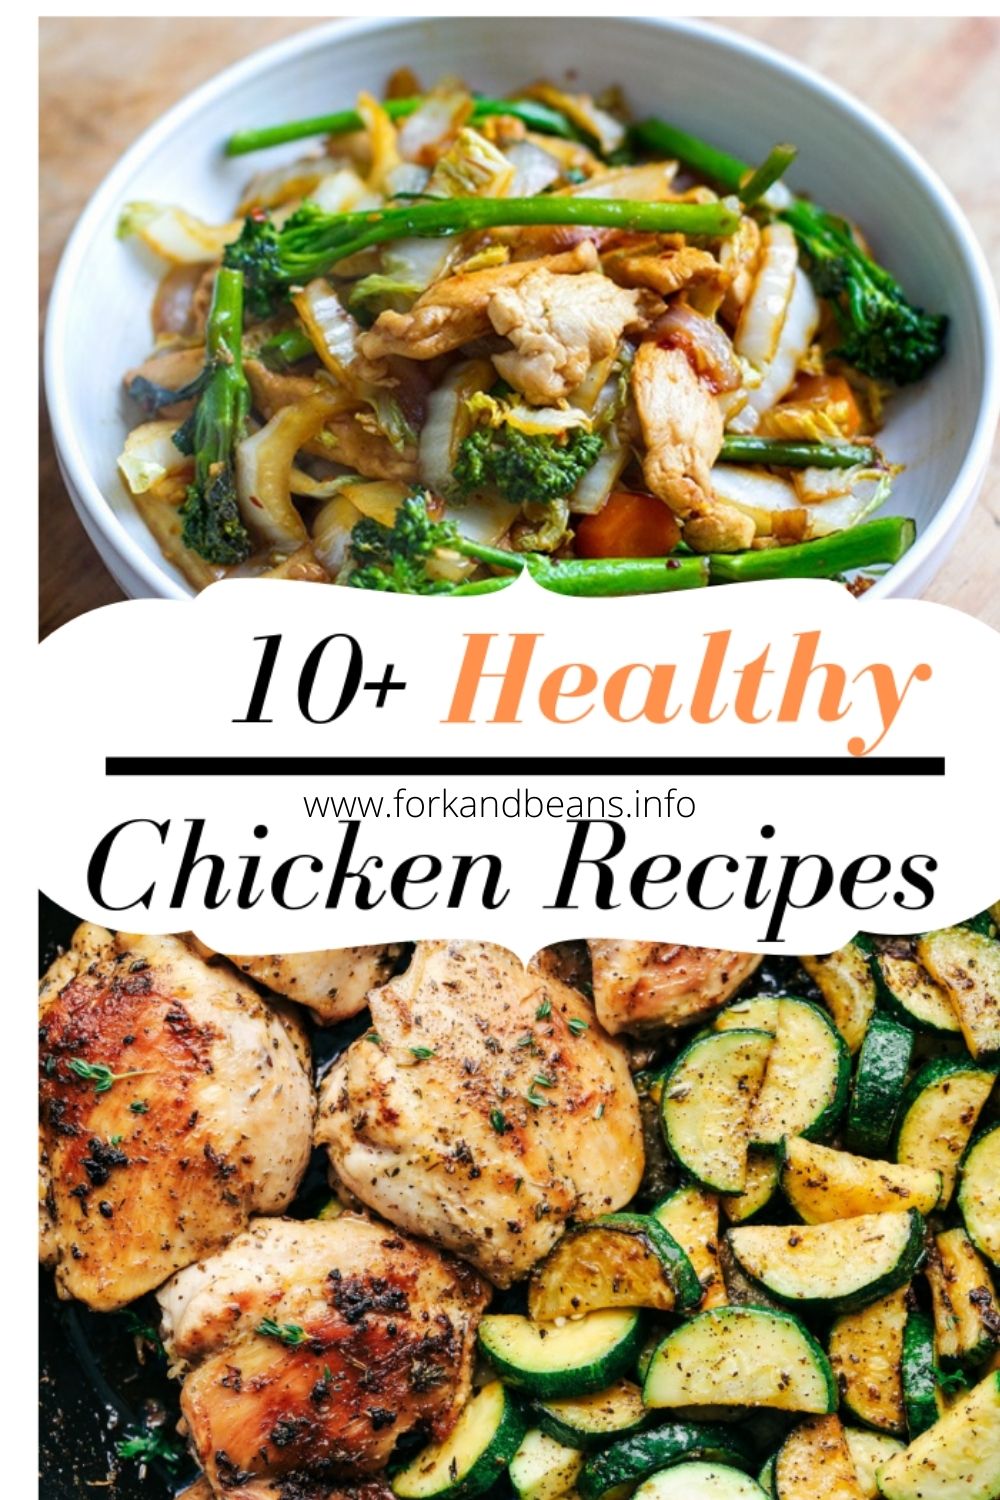 Healthy Stir-Fry of Chicken and Vegetables